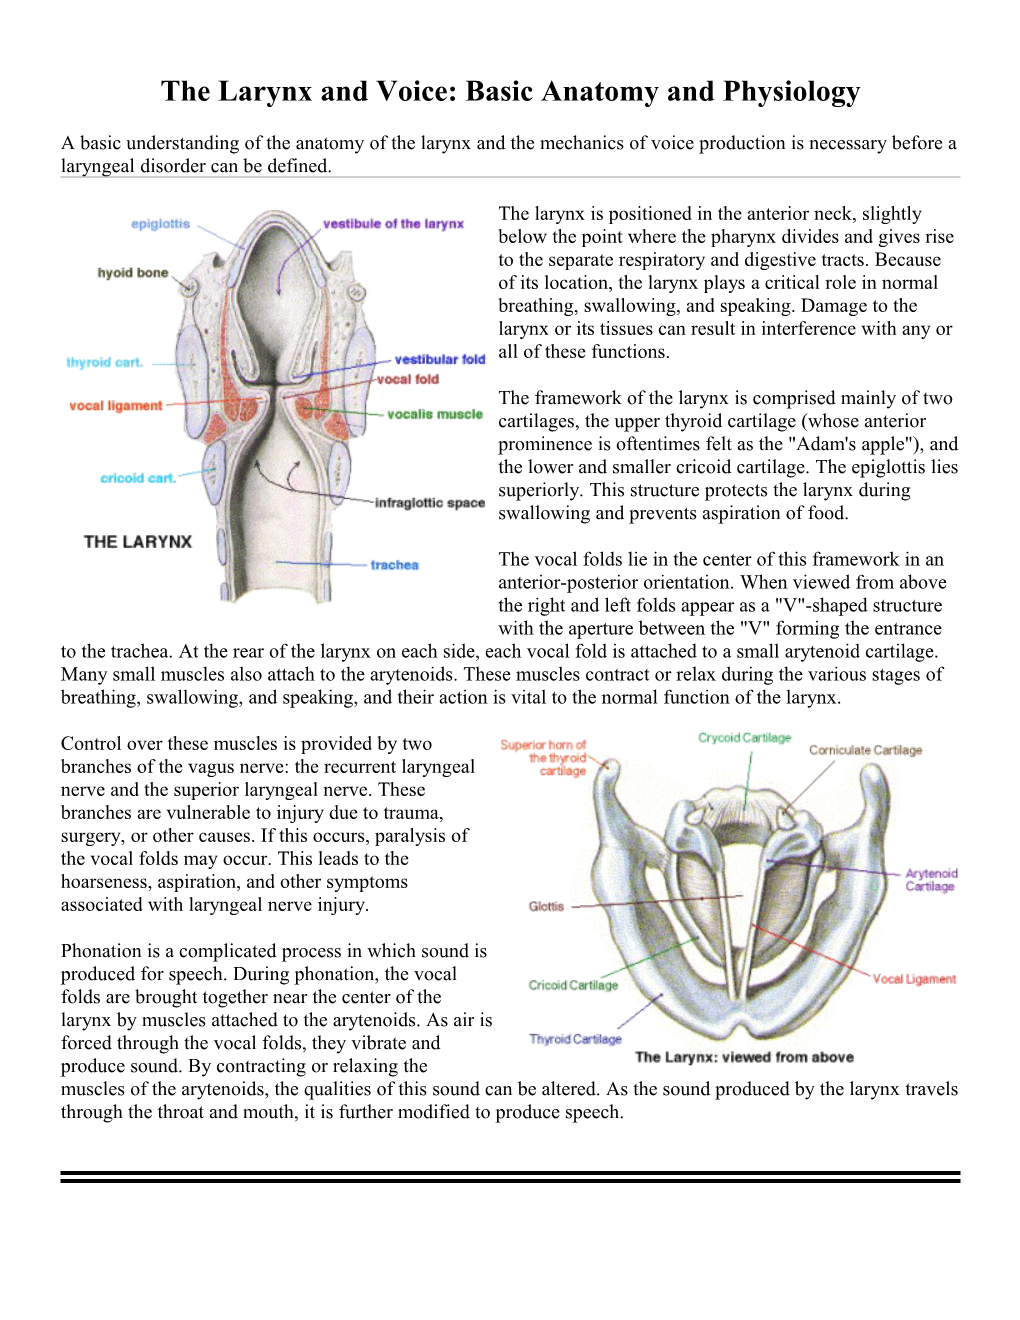 The Larynx and Voice: Basic Anatomy and Physiology